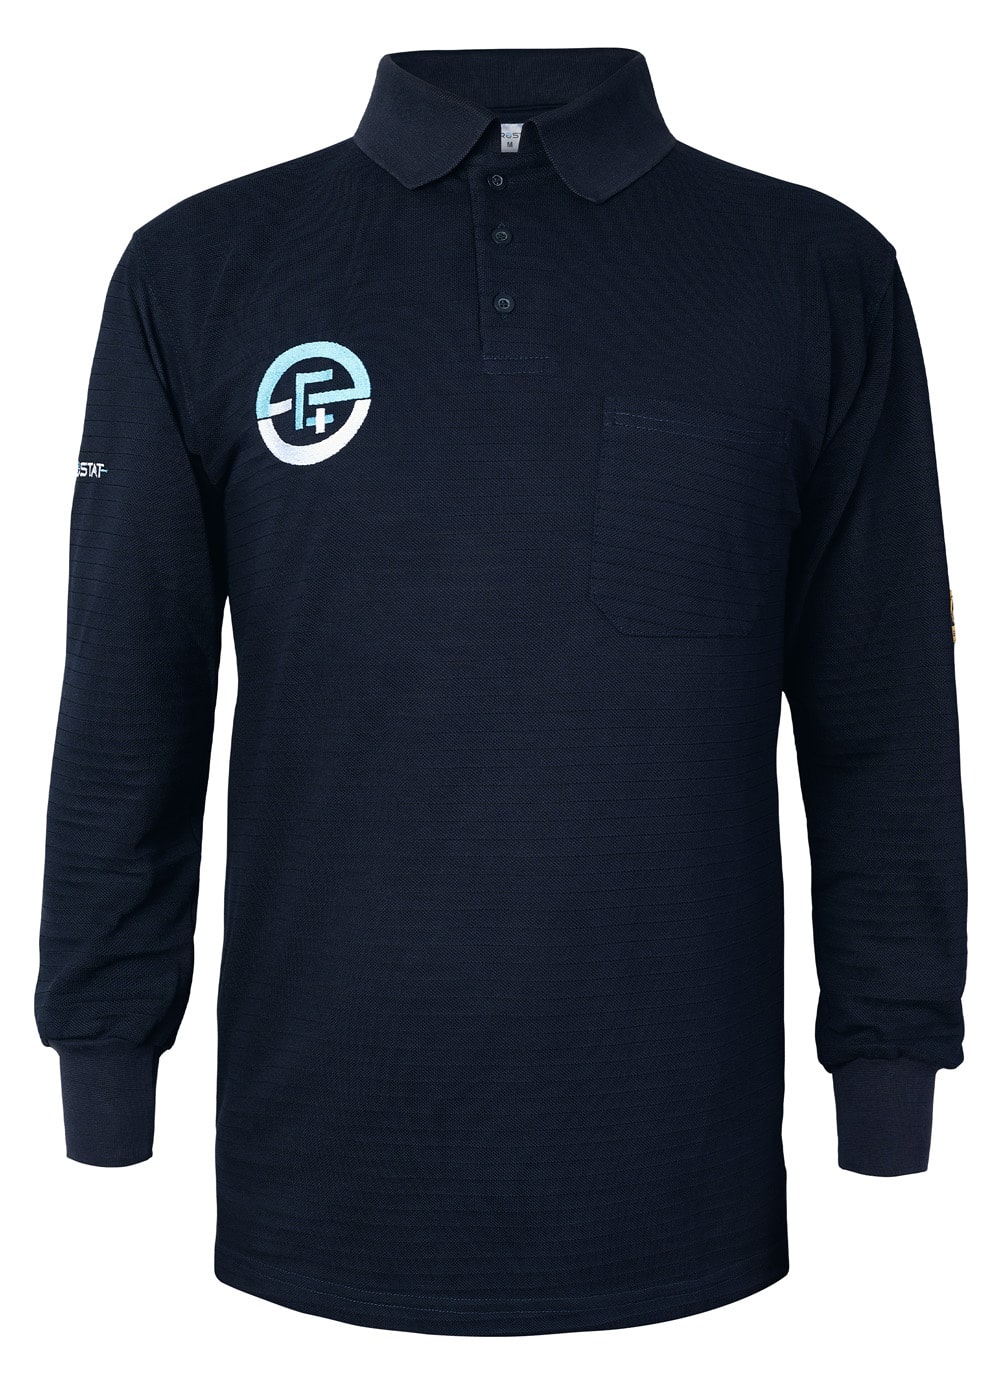 Front photo of a navy blue shirt with embroided logo of Eurostat symbol on the chest. A photo taken for its online store and catalog